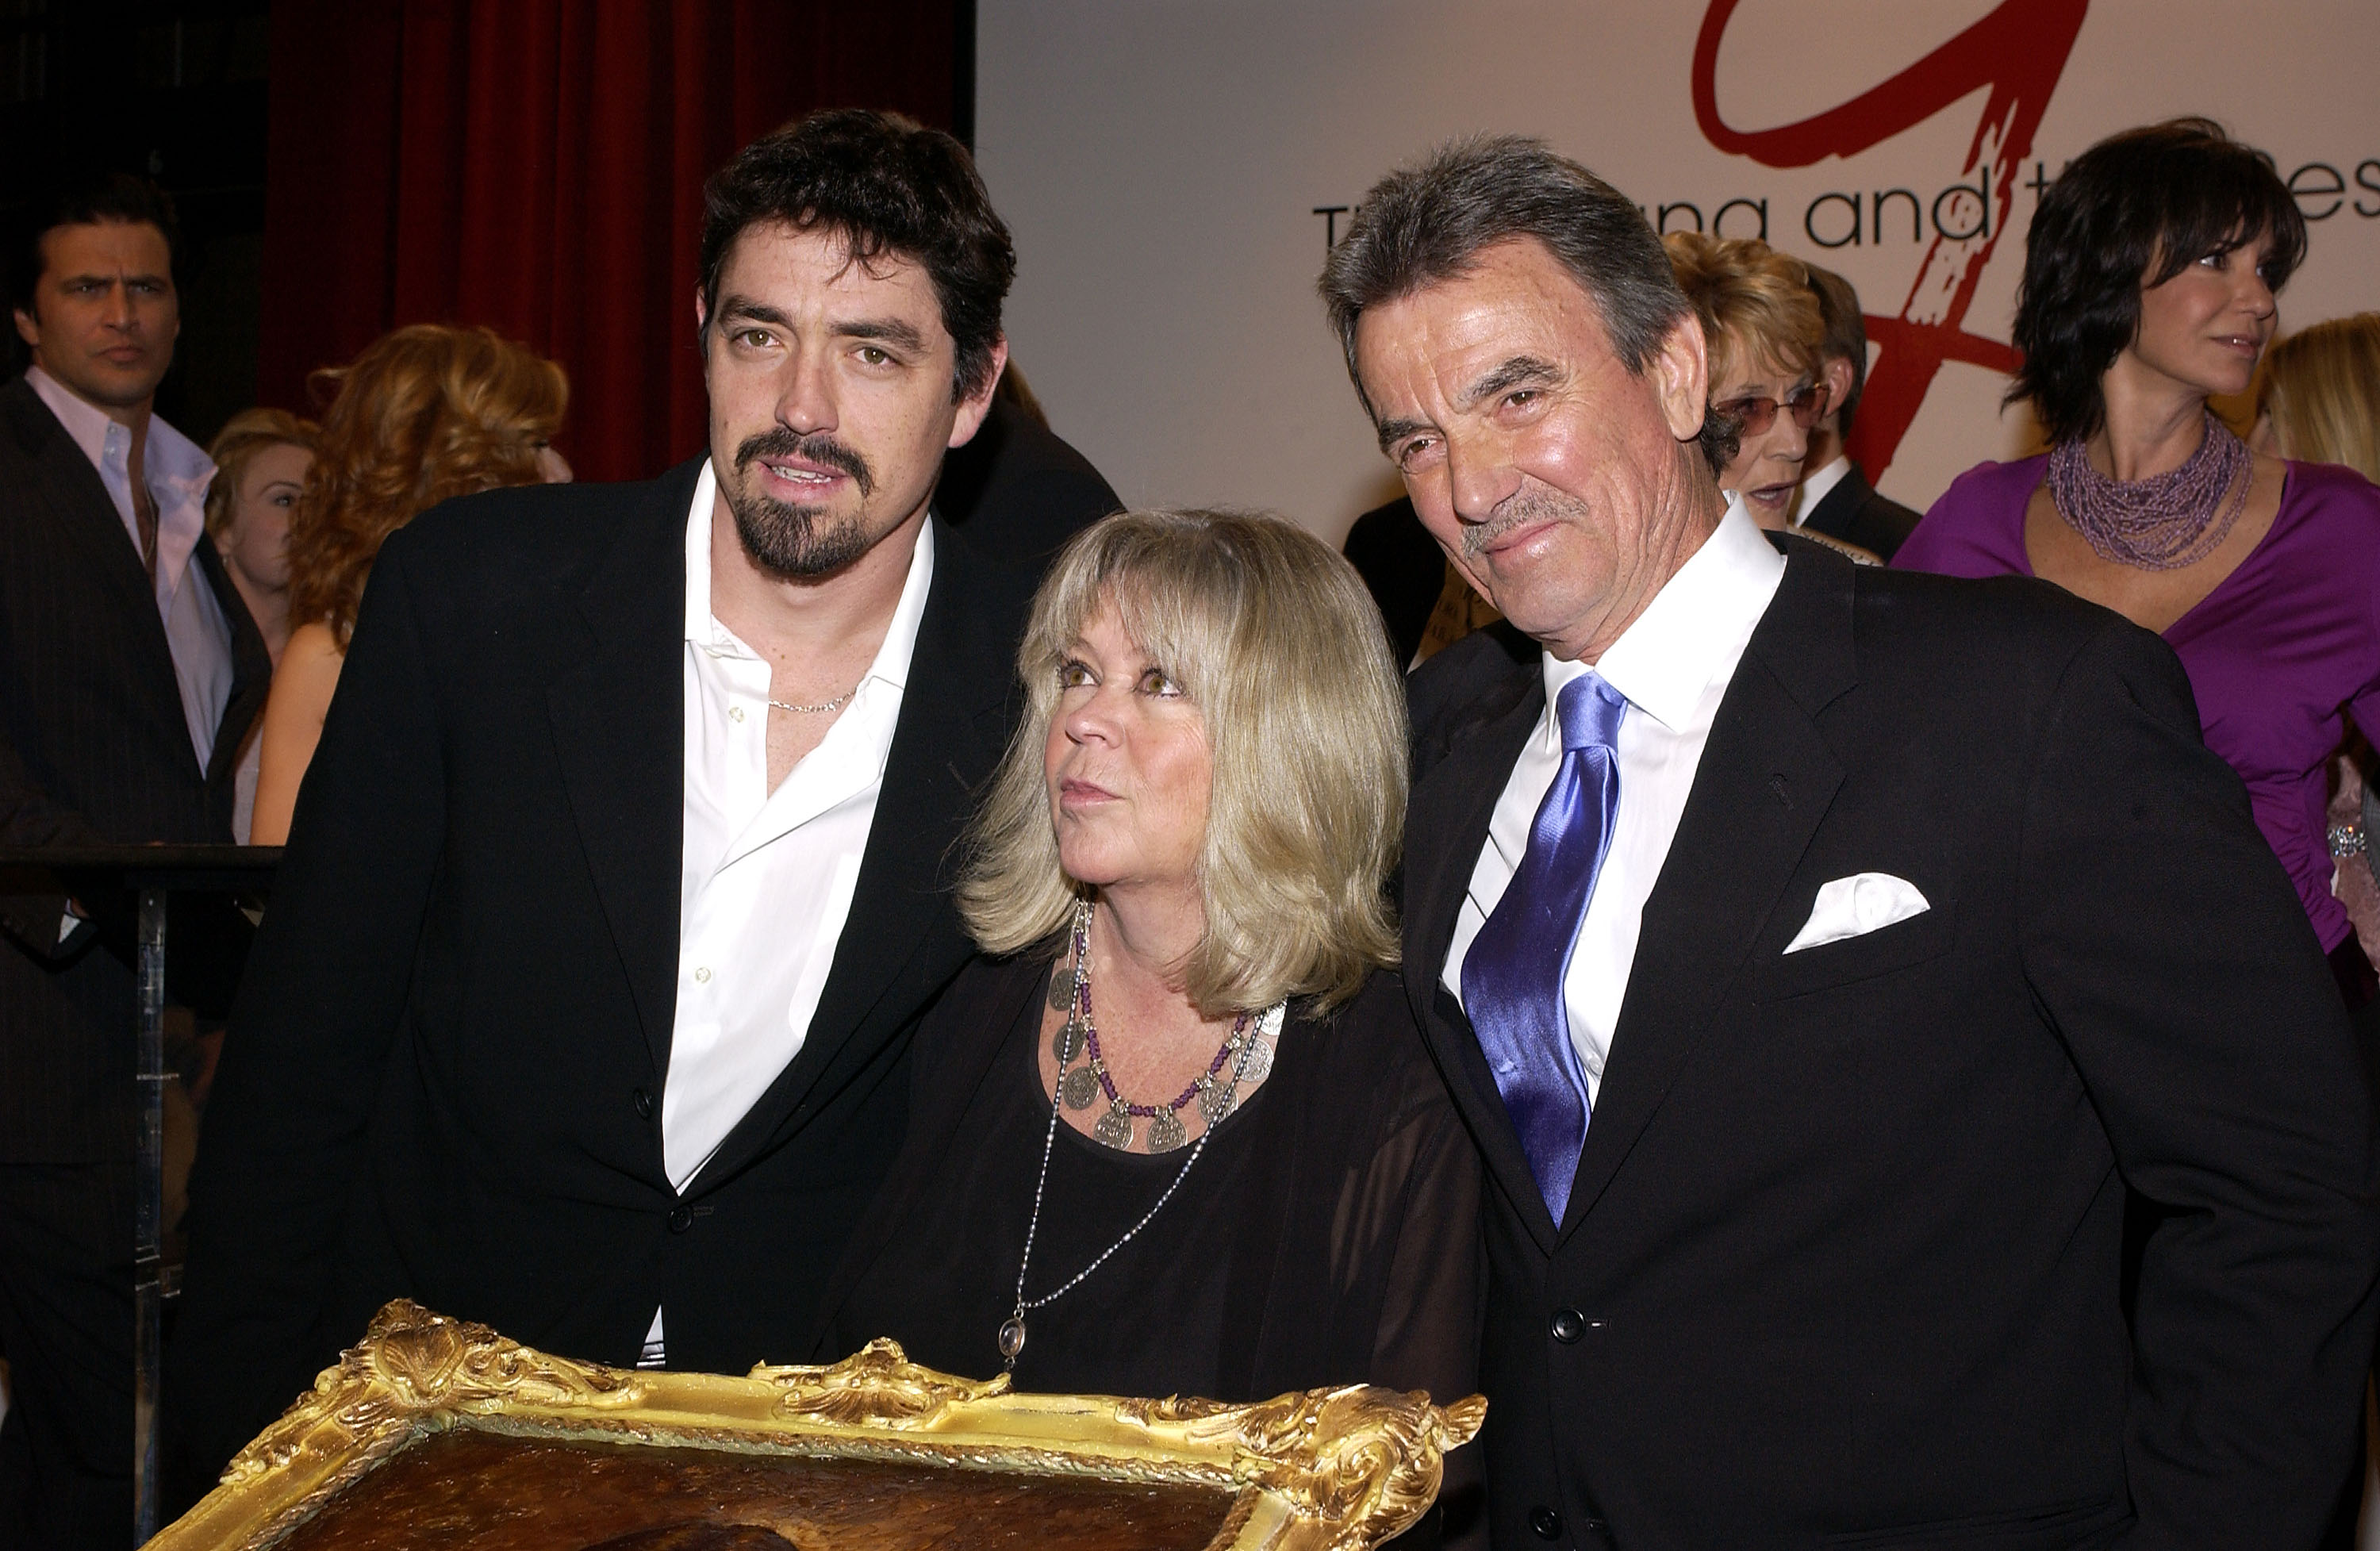 Christian Gudegast, Dale Russell Gudegast, and Eric Braeden attend the latter's 25th-anniversary playing legendary character Victor Newman on "The Young and the Restless" on February 1, 2005, at CBS Television City in Los Angeles, California. | Source: Getty Images